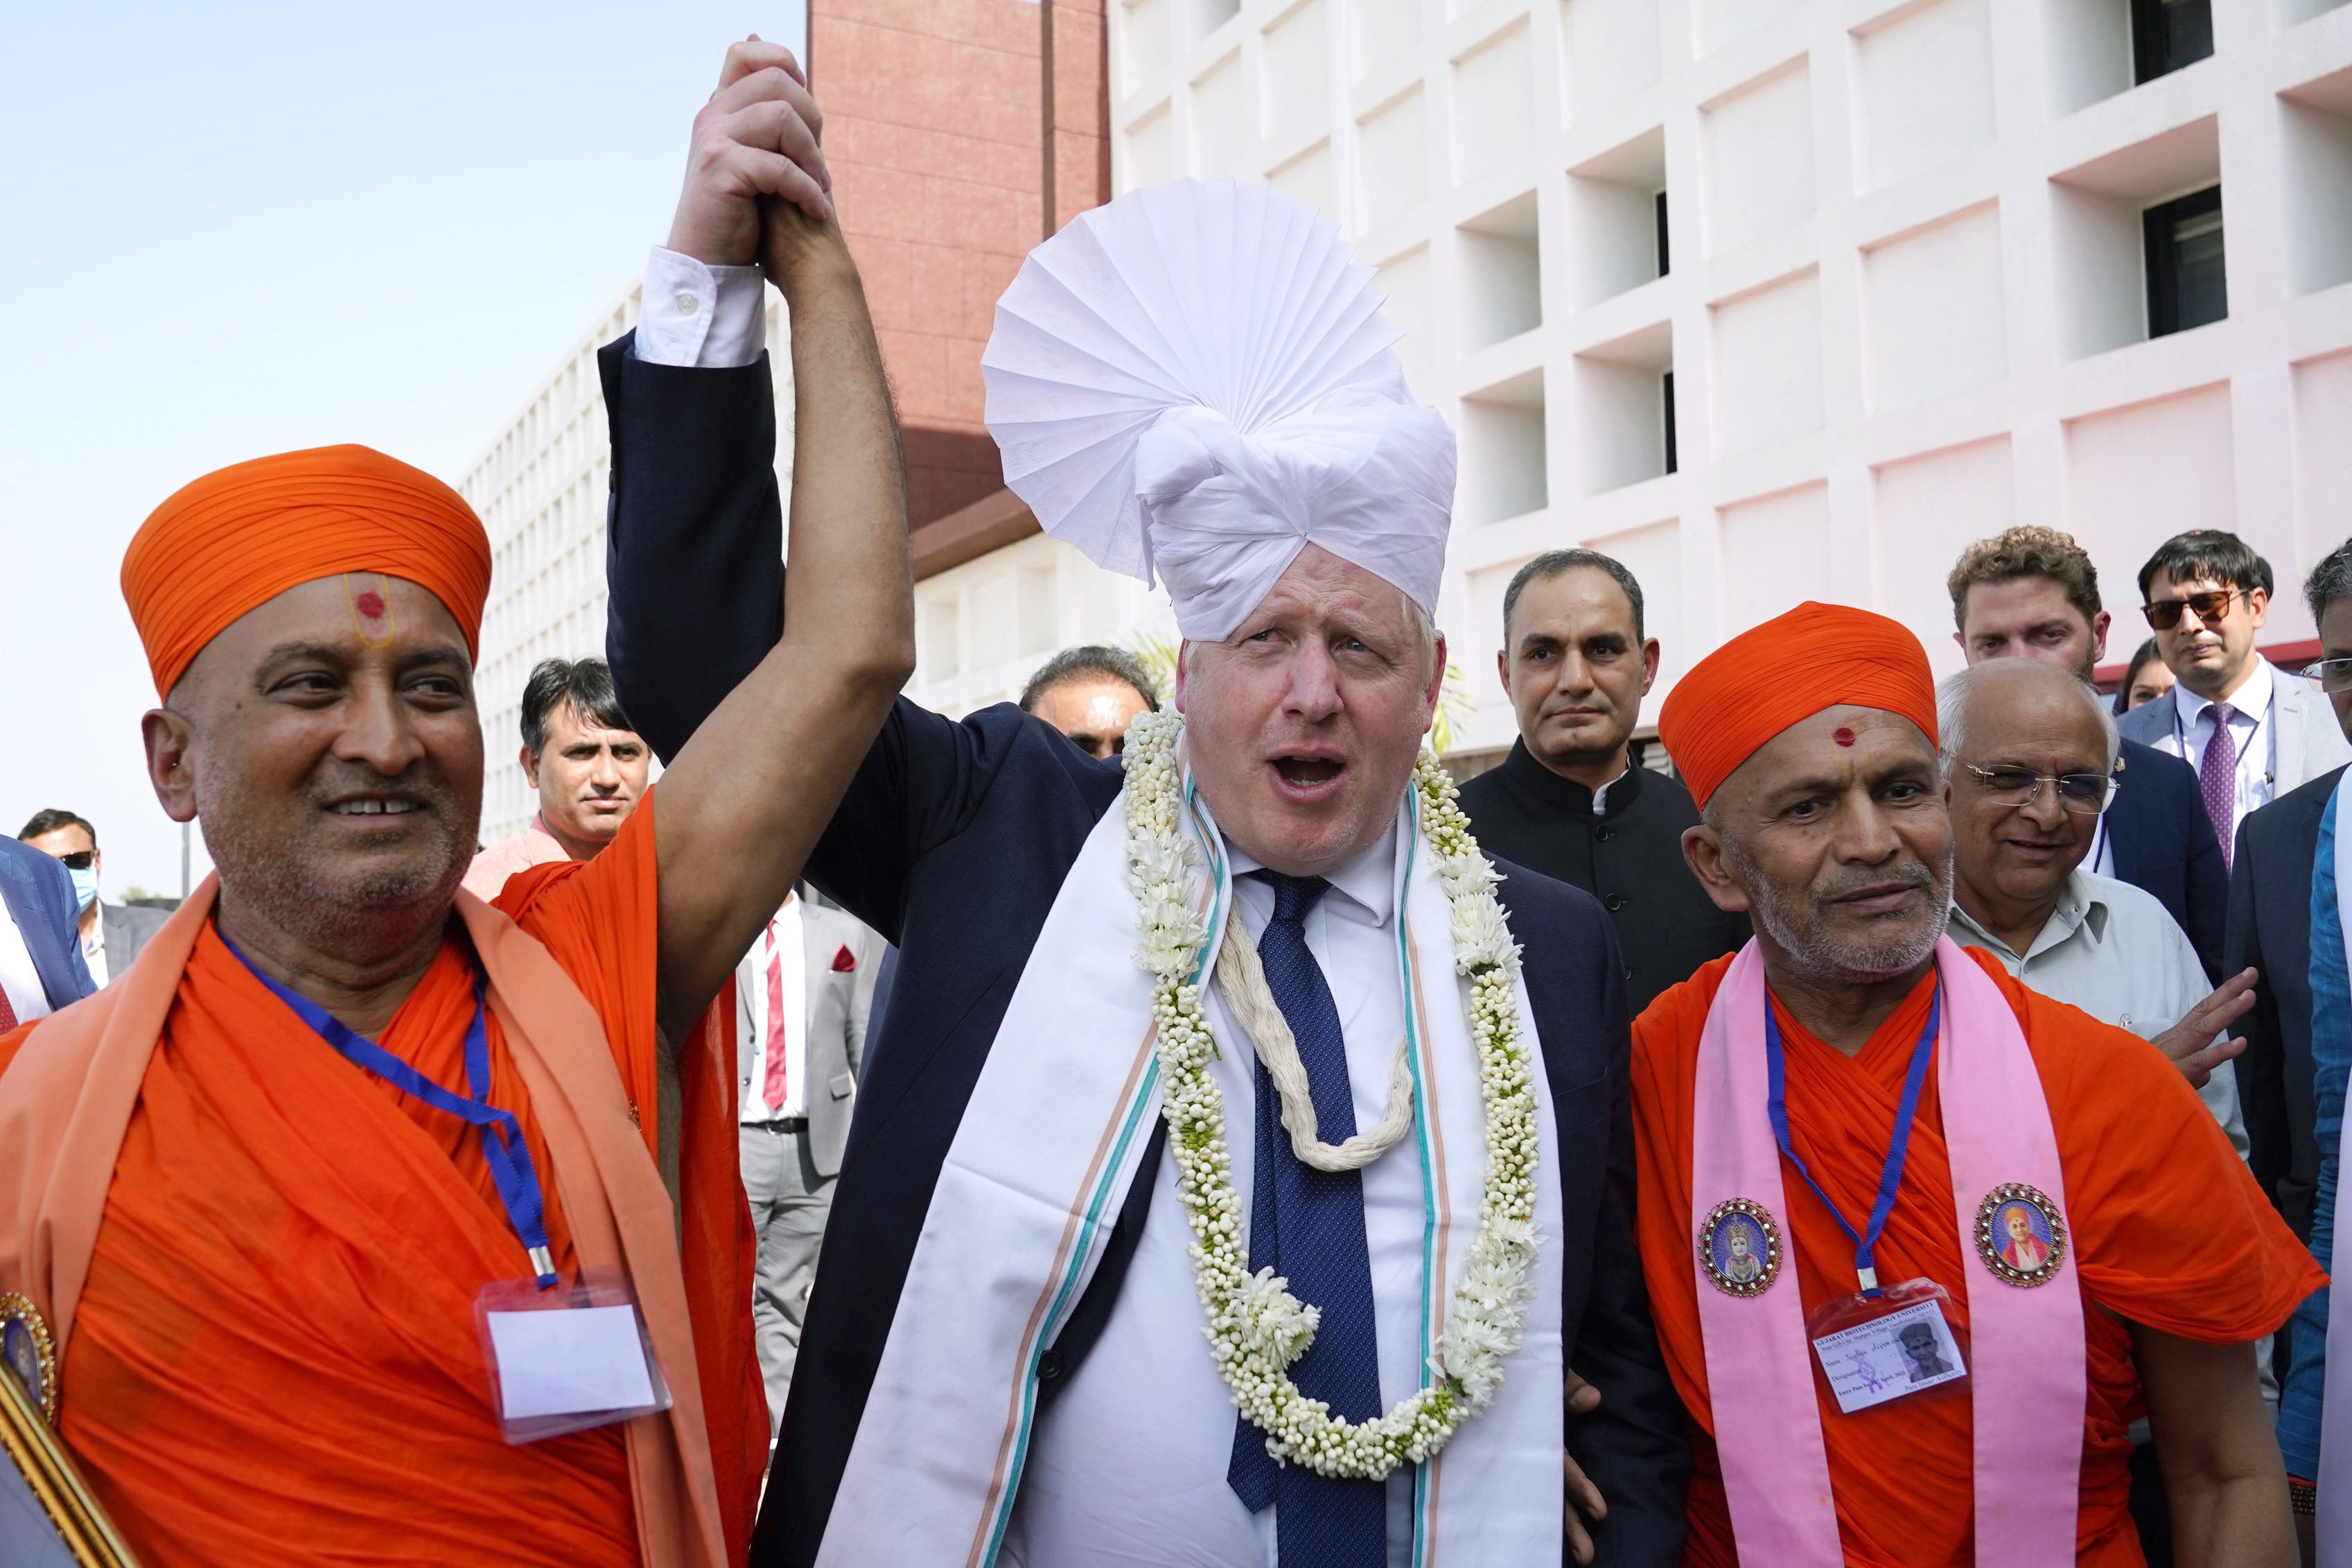 Prime Minister Boris Johnson is dressed in a turban during a visit to Gujarat Biotechnology University, in Gandhinagar, Gujarat, as part of his two day trip to India on April 21, 2022 in Gandhinagar, India. During his two-day visit to India Boris Johnson is expecting to seal new collaborations on defence and green energy as he seeks to reduce the country’s dependence on Russian fossil fuels and military equipment